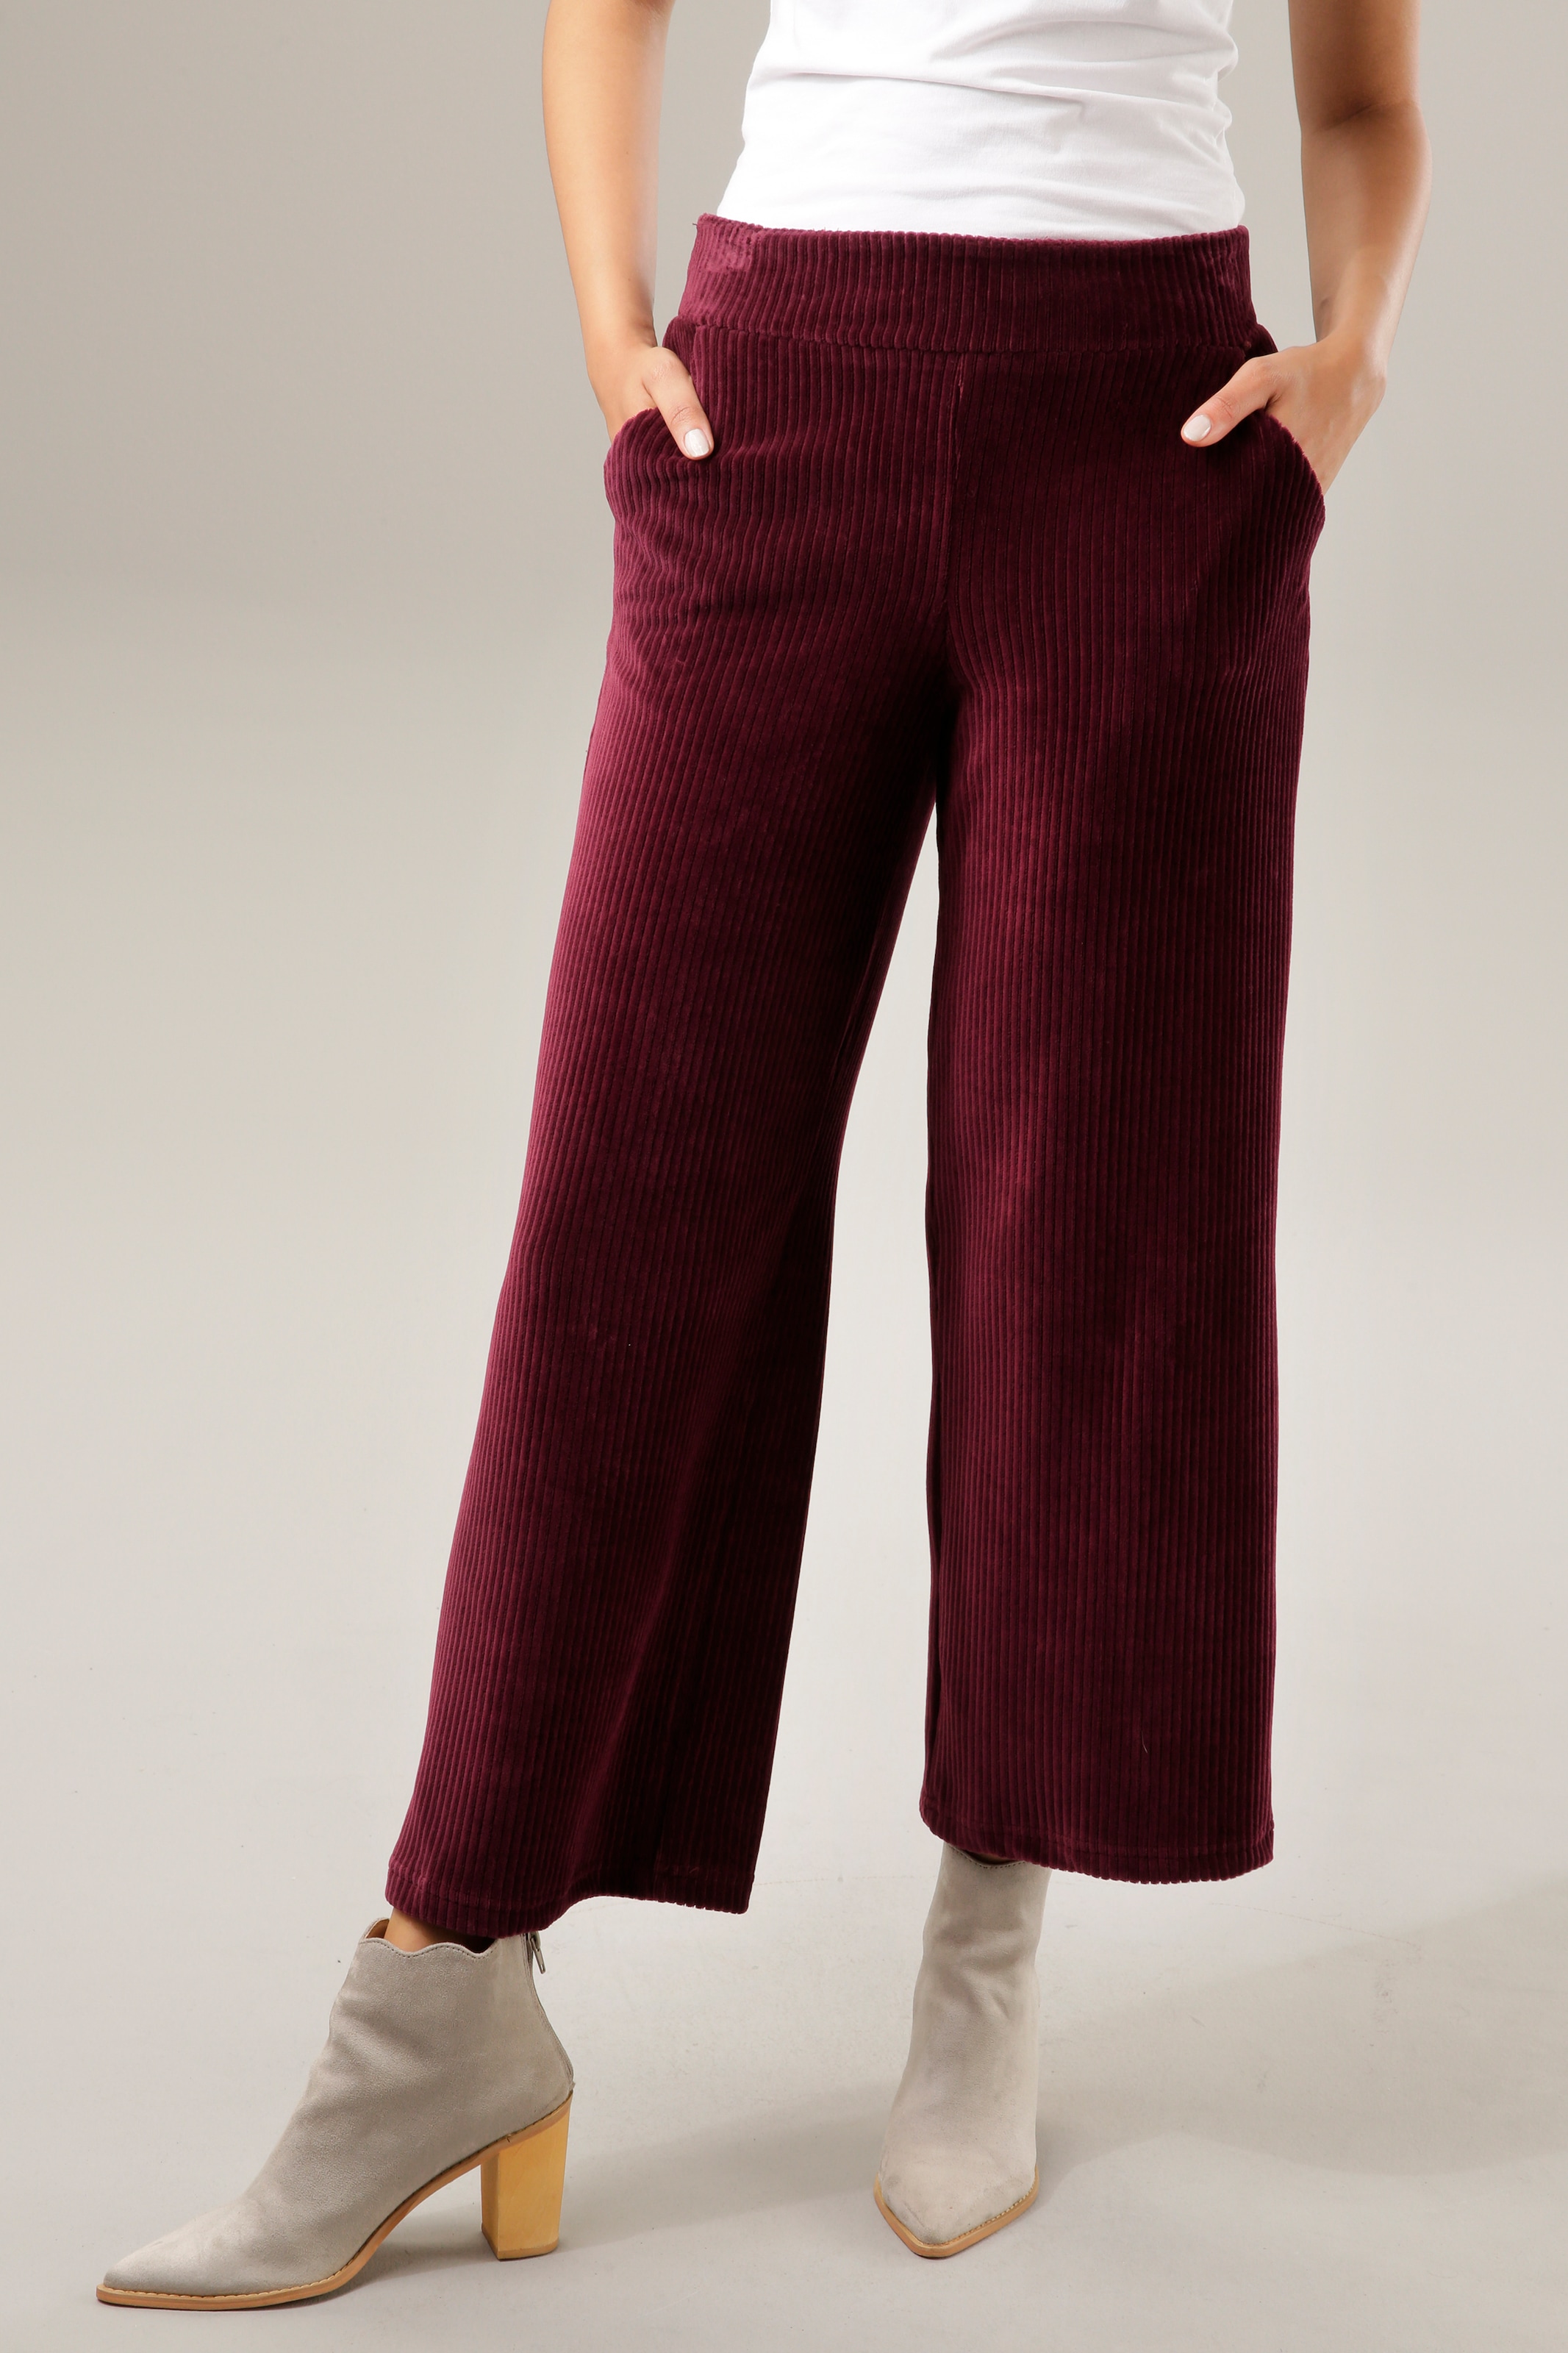 Aniston CASUAL Cordhose, in trendiger bei Culotte-Form ♕